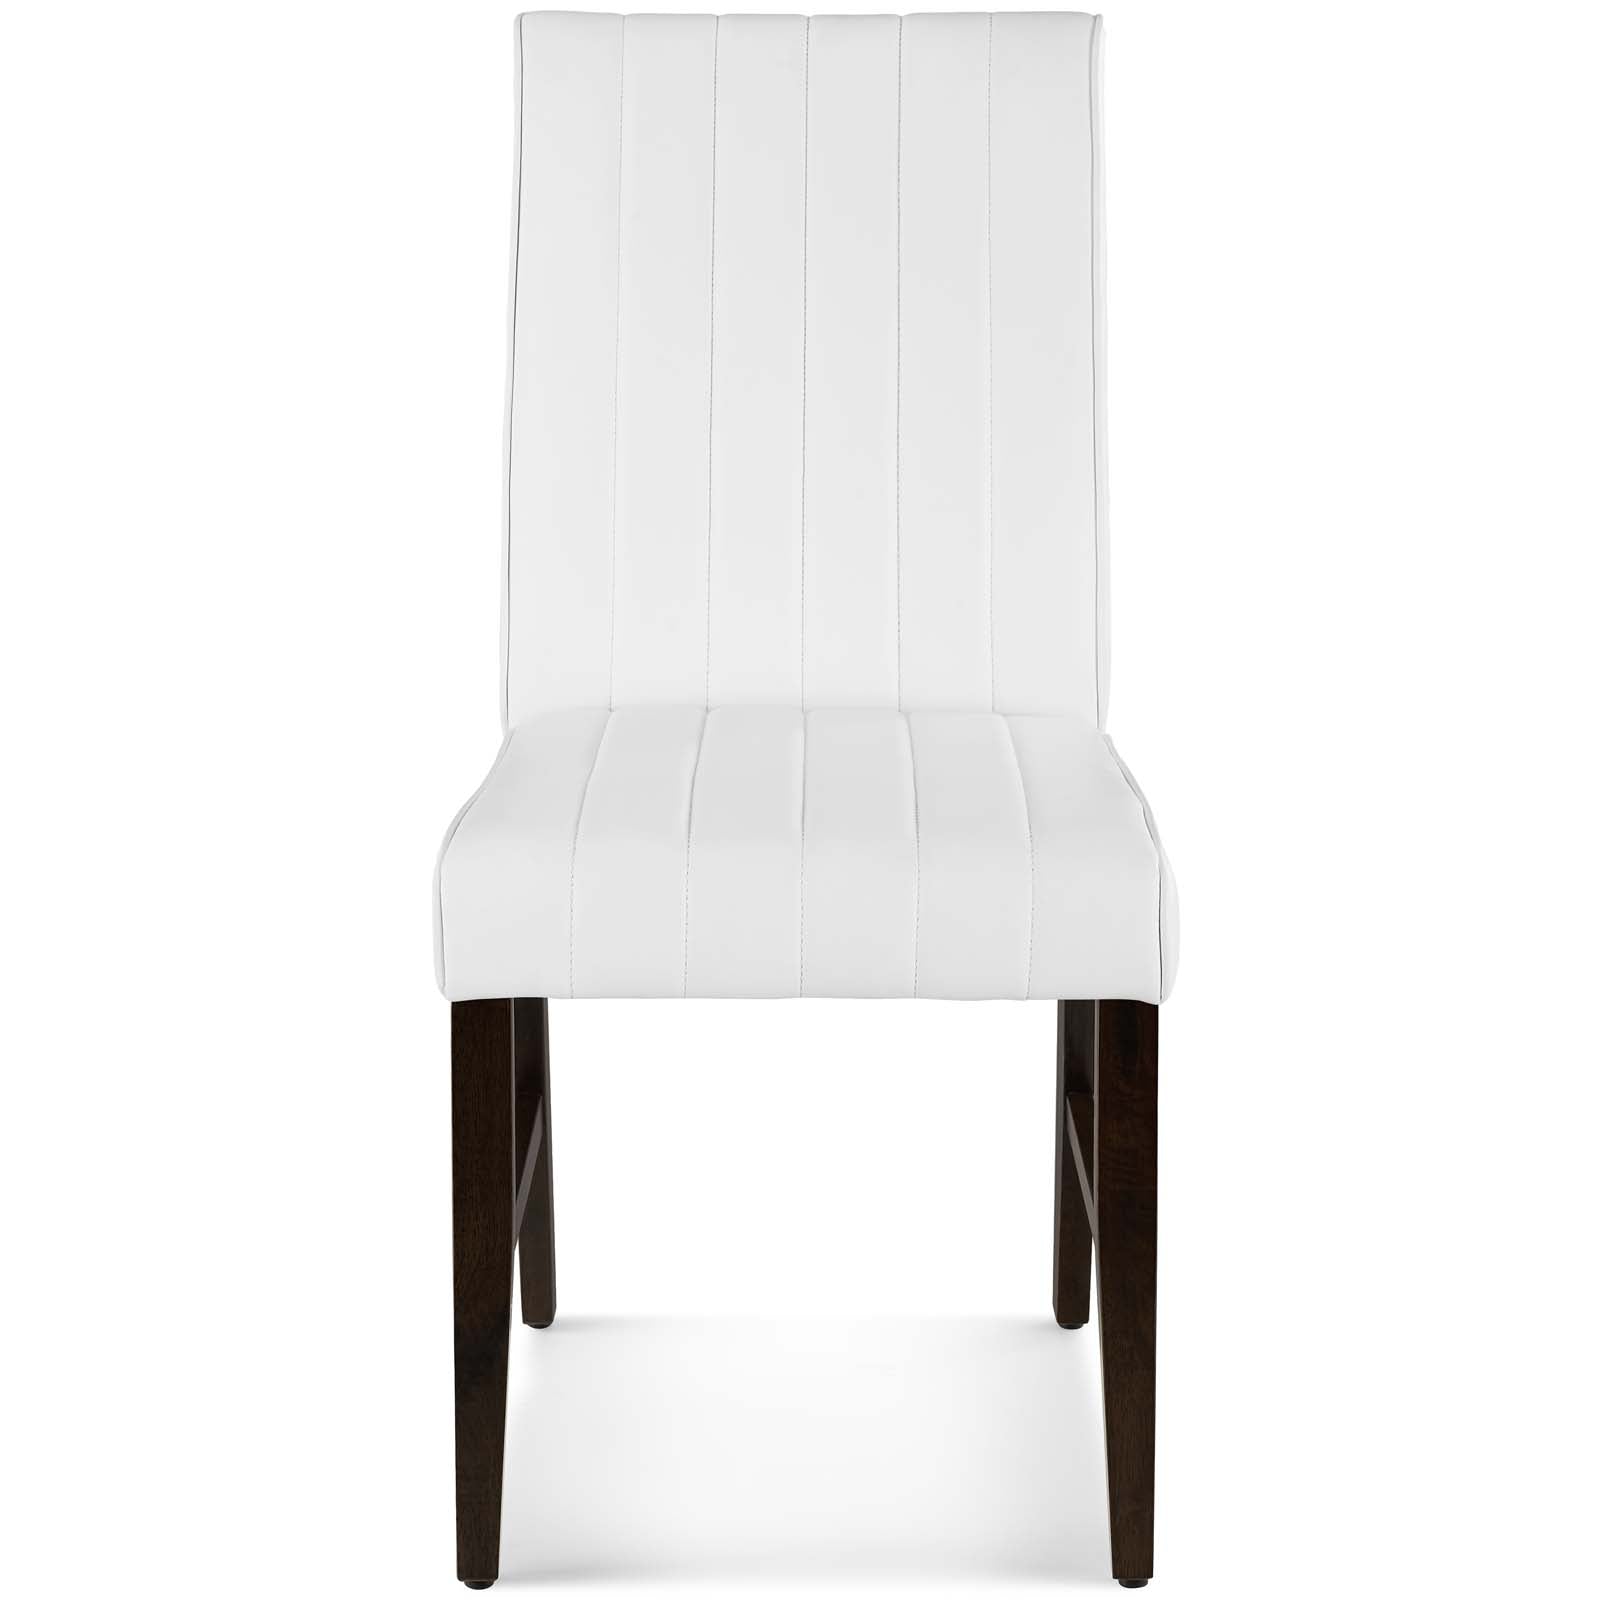 Modway Dining Chairs - Motivate Channel Tufted Upholstered Faux Leather Dining Chair ( Set of 2 ) White